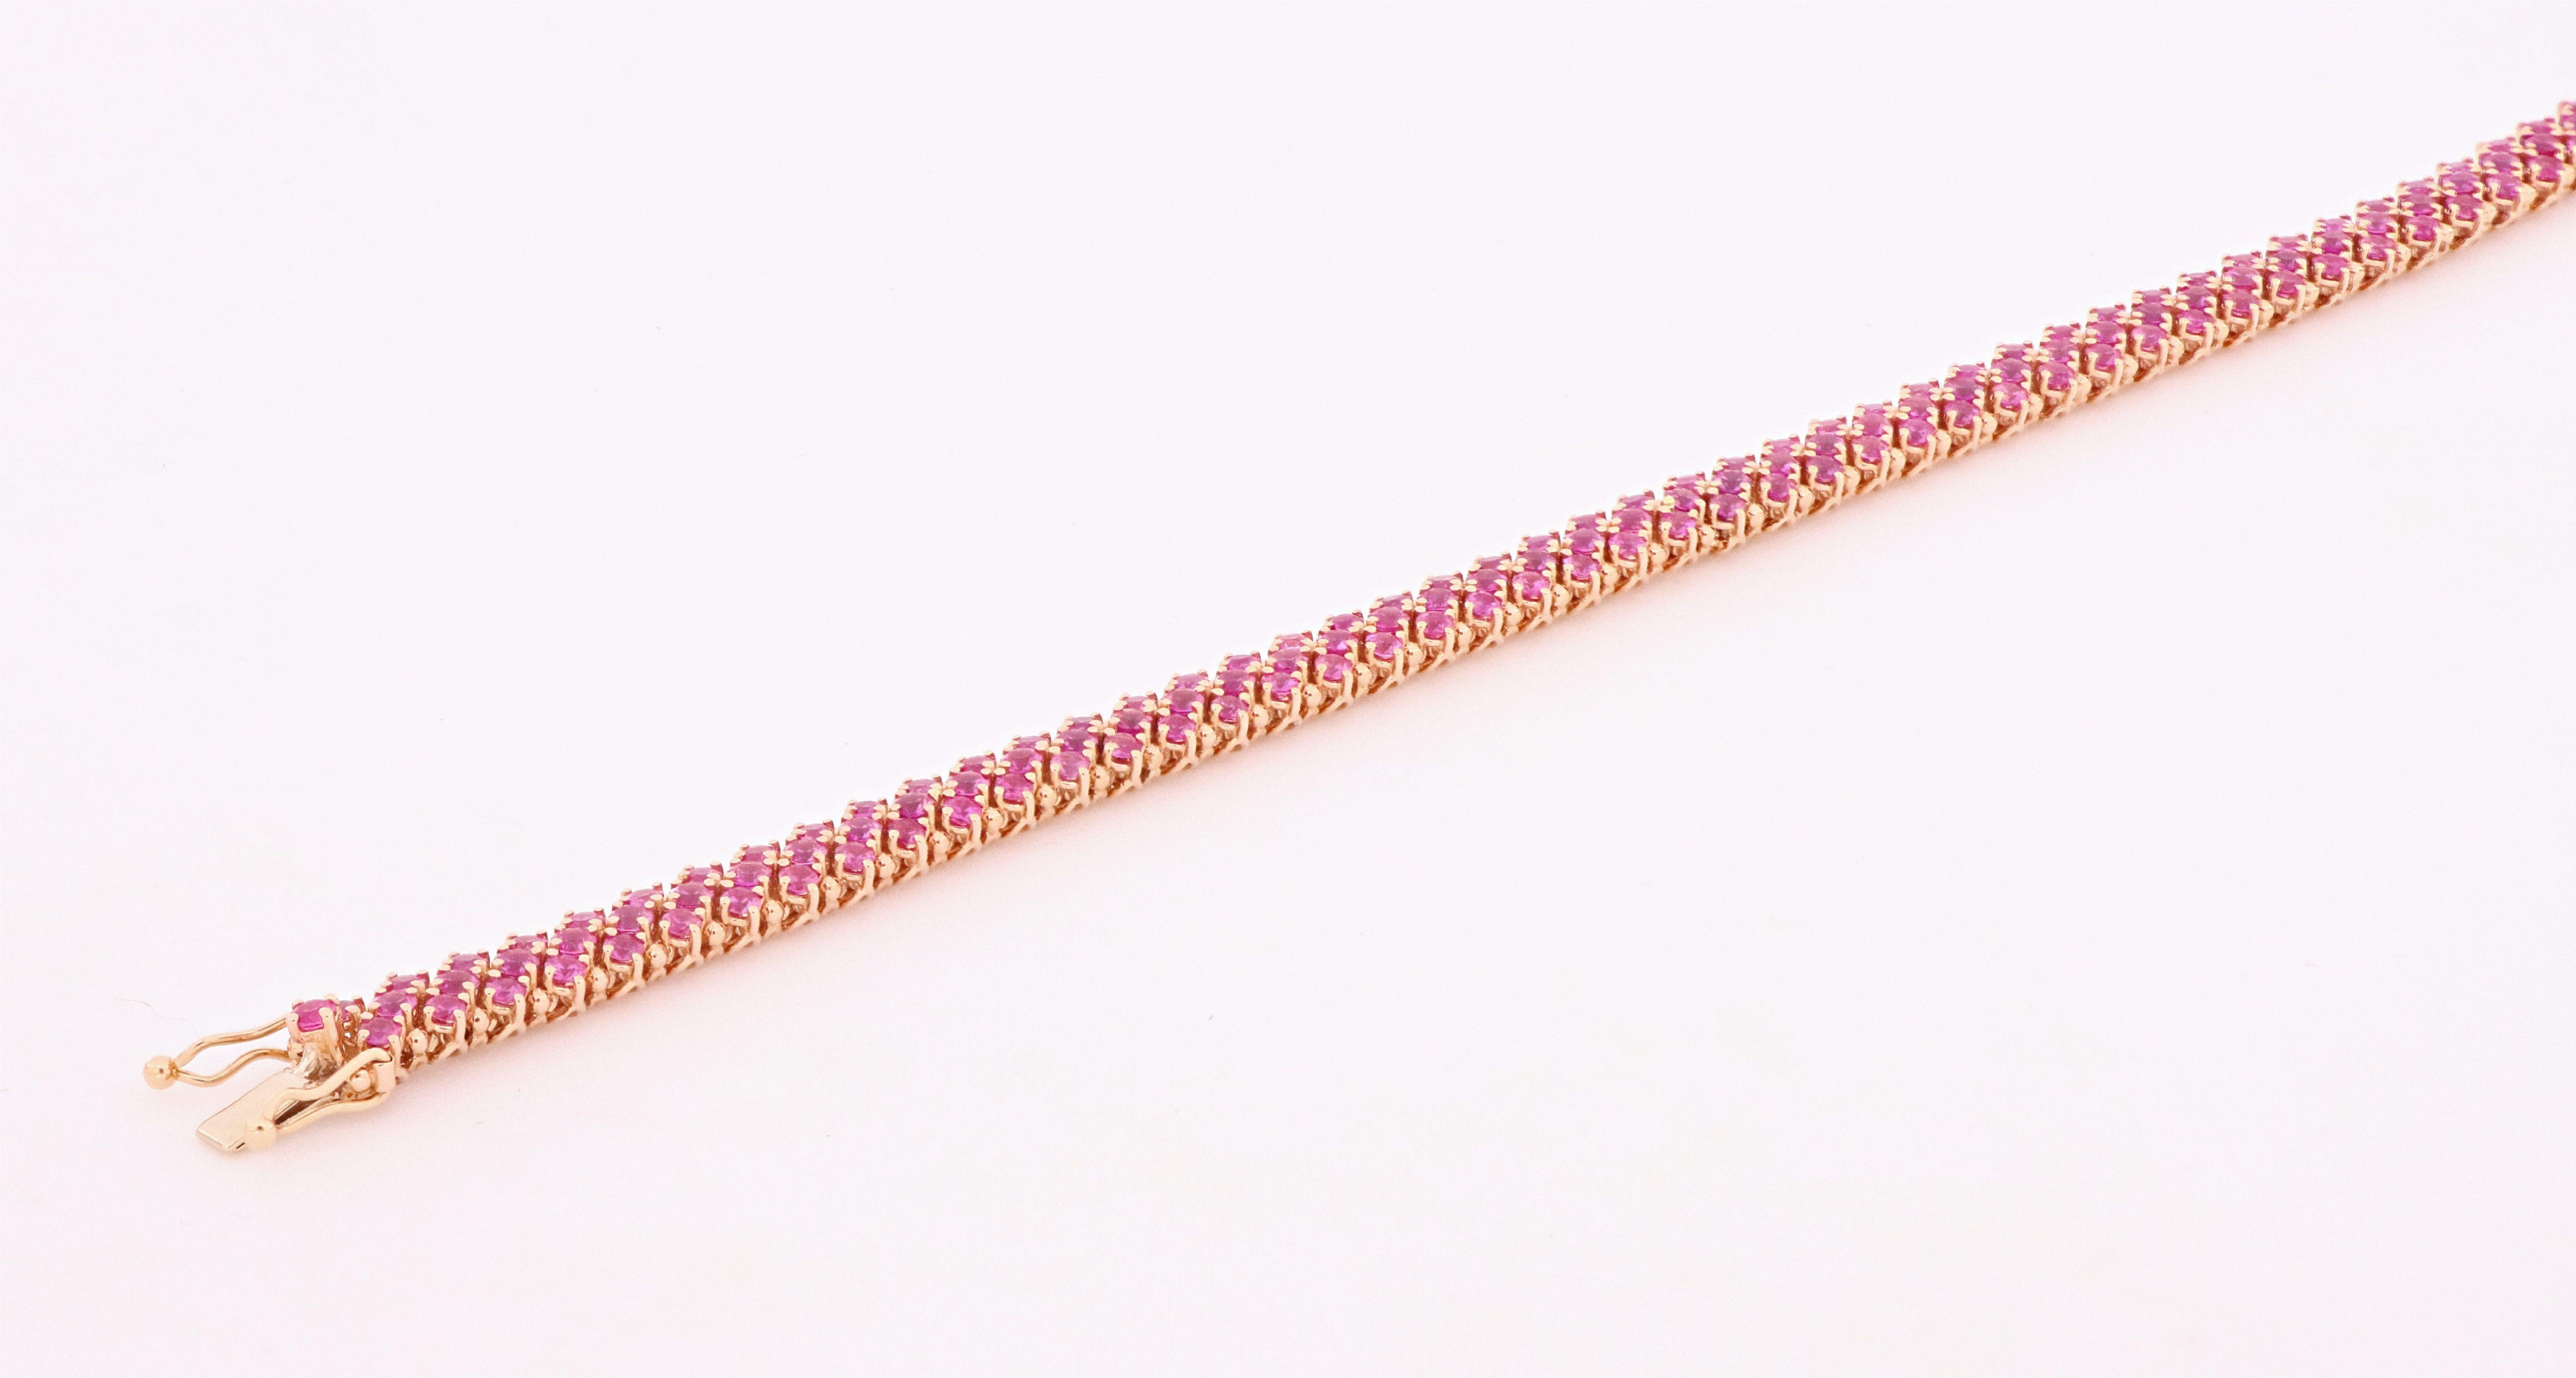 Introducing our Soft 3-Row Mesh Pink Sapphires Pavé Bracelet, a contemporary masterpiece in 18kt rose gold that reinvents the classic tennis bracelet with a modern twist.

The Key Features of this Made in Italy bracelet are:

1. Radiant Pink